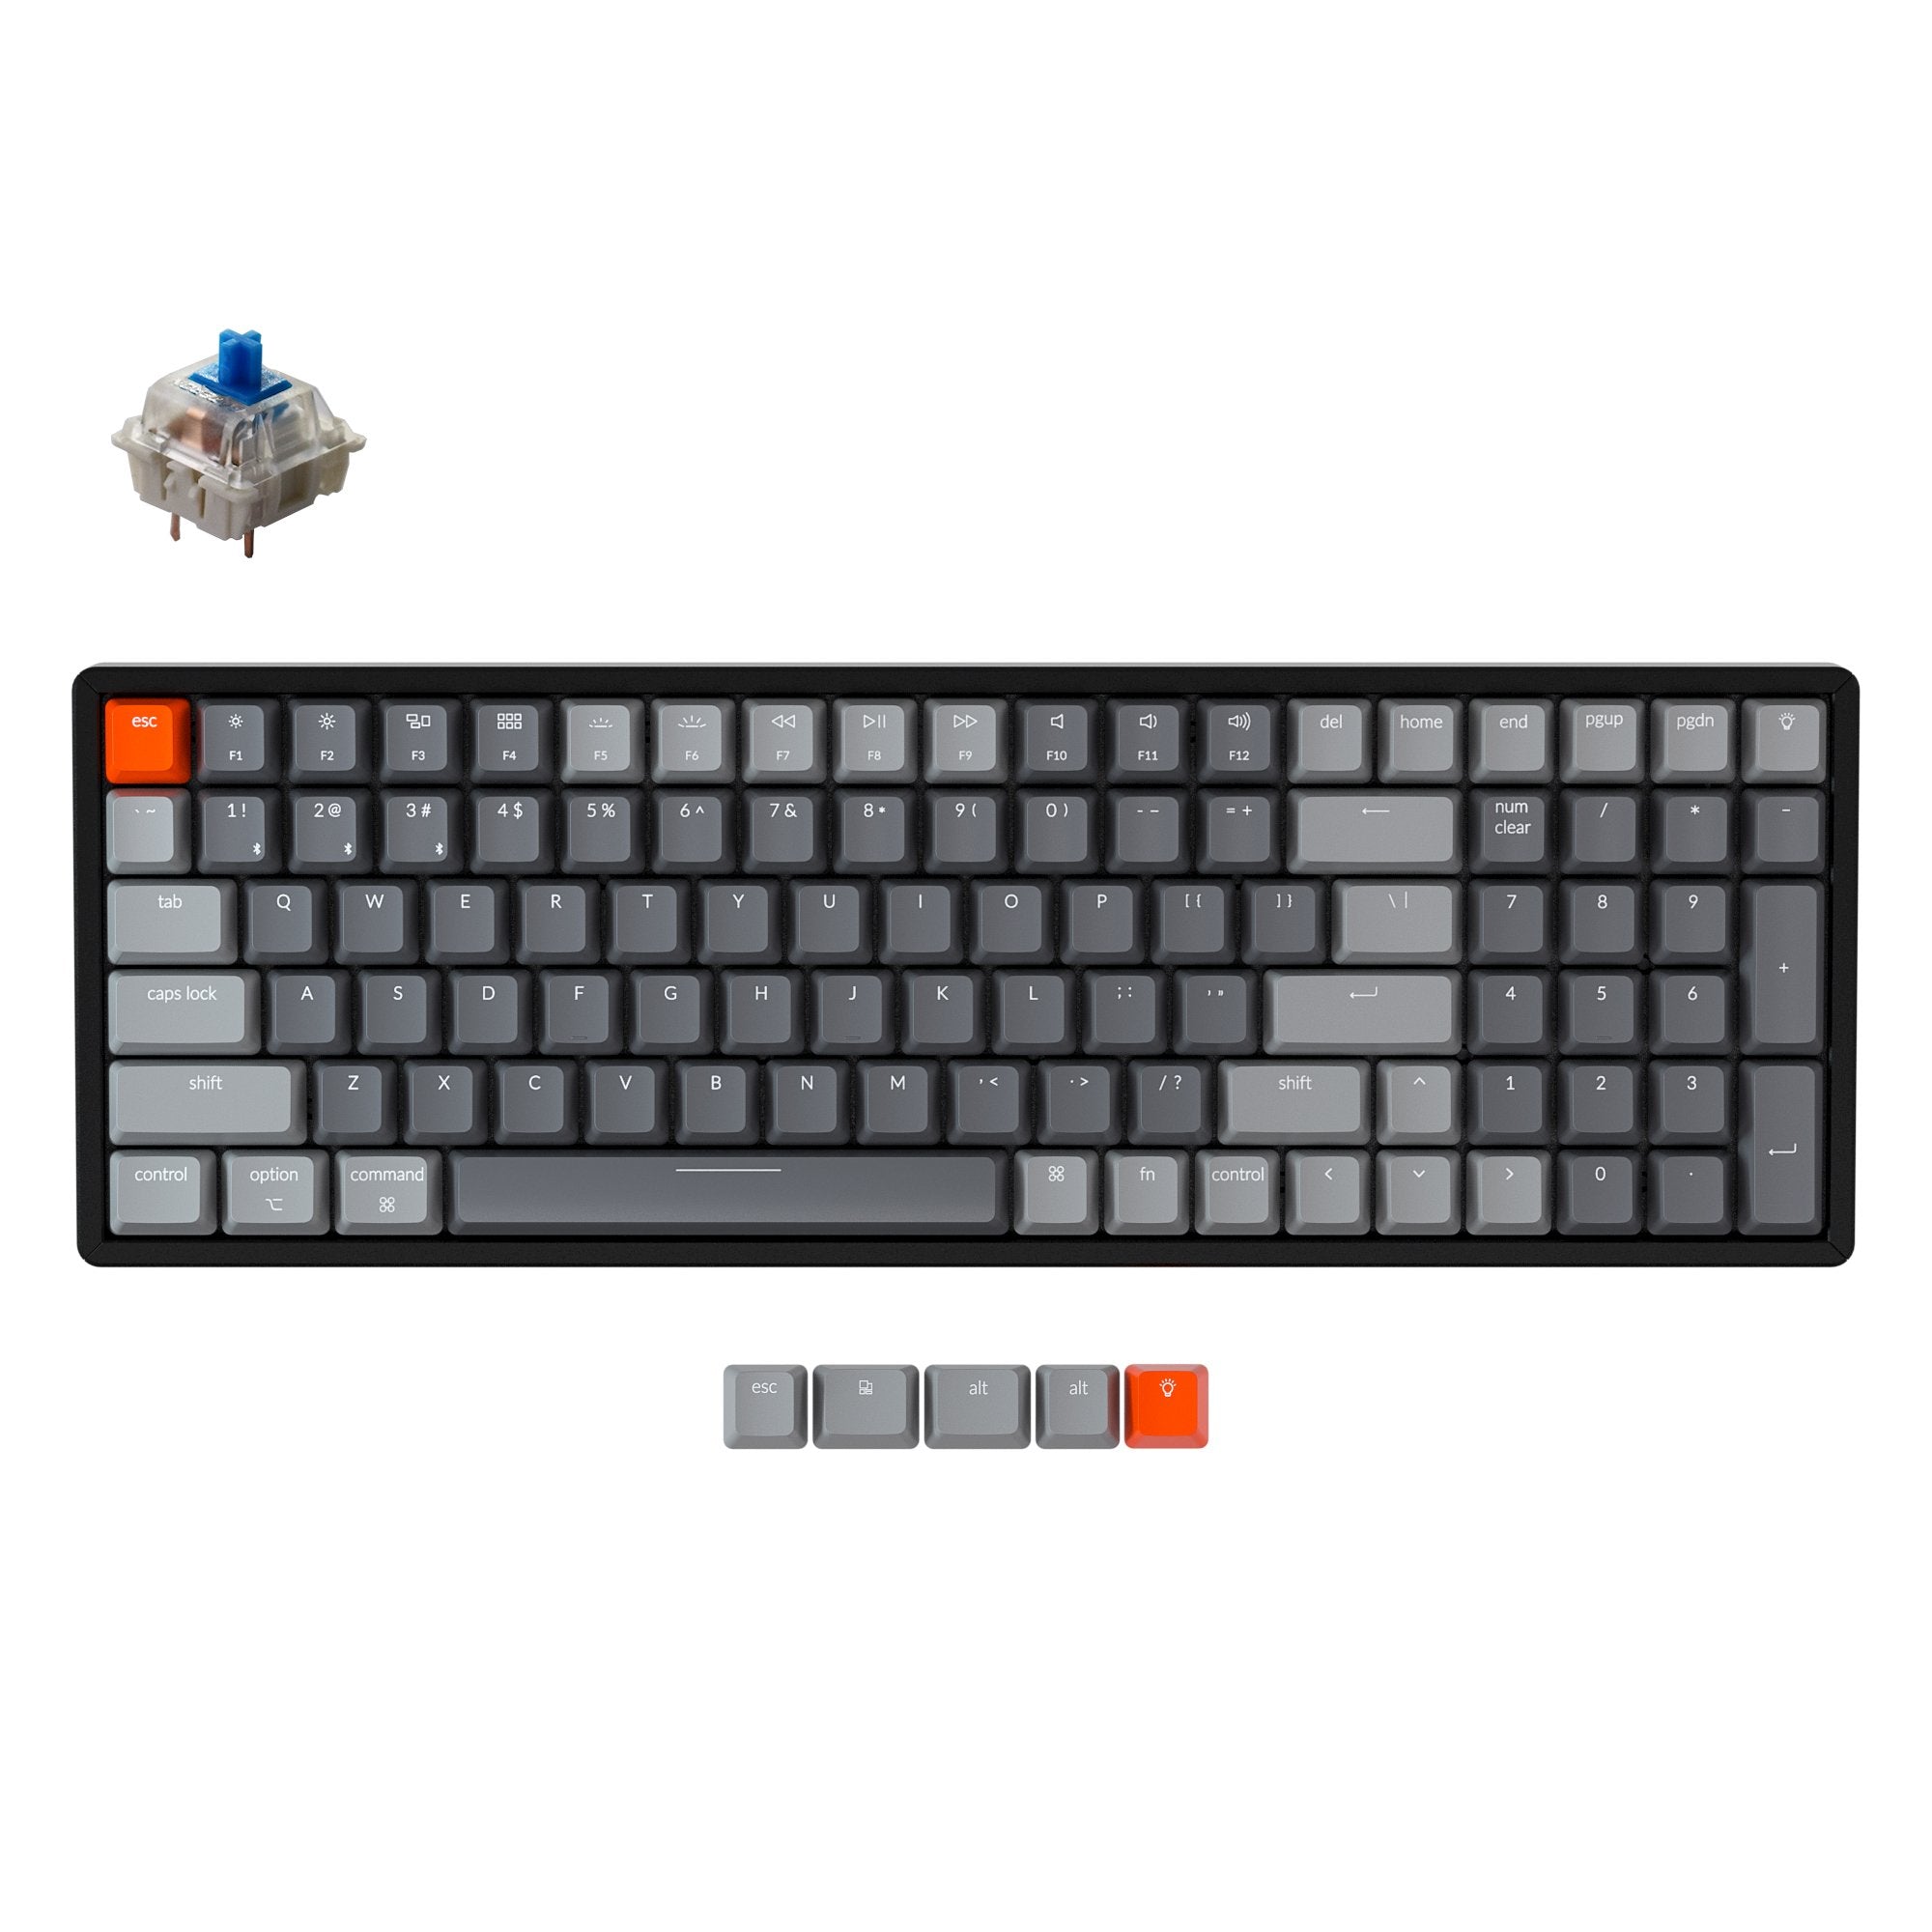 Keychron K4 Version 2 Hot-swappable Wireless Mechanical Keyboard, 100-keys layout for Mac Windows iOS with Gateron blue switch with type-C RGB or white backlight and aluminum frame